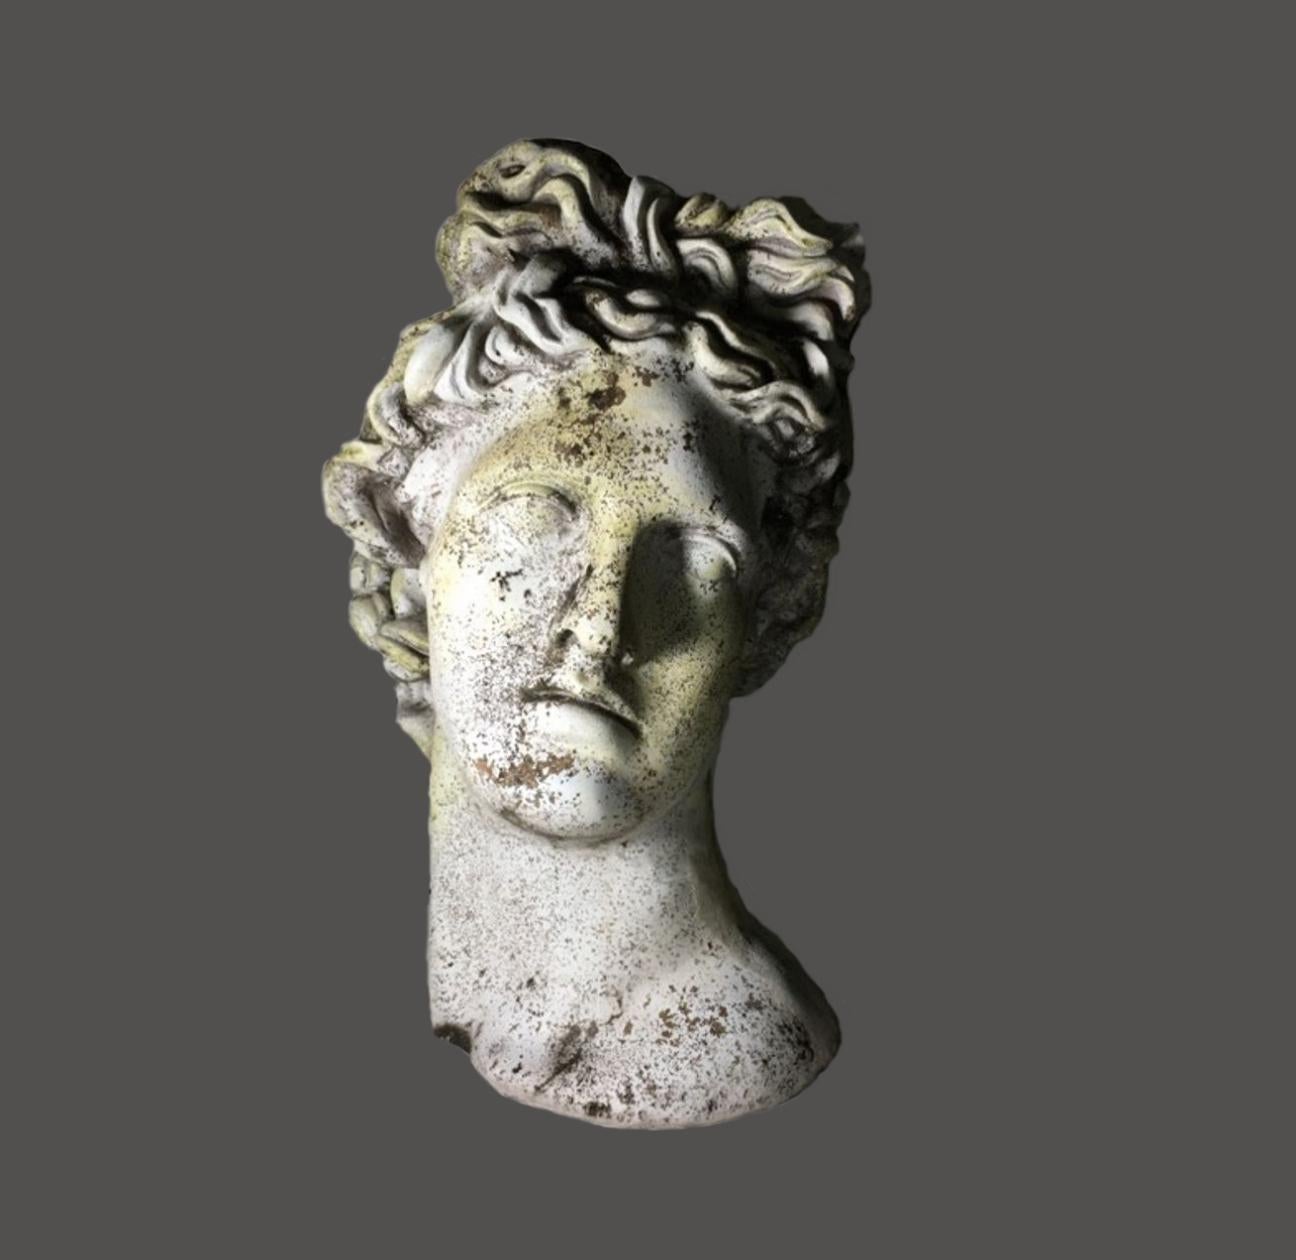 A fantastic decorative Classical Greek statue planter, depicting the head of Alexander the Great. Mid-20th century and alive with style and garden good looks, this planter will slay when employed inside the home or porch on a console or serving